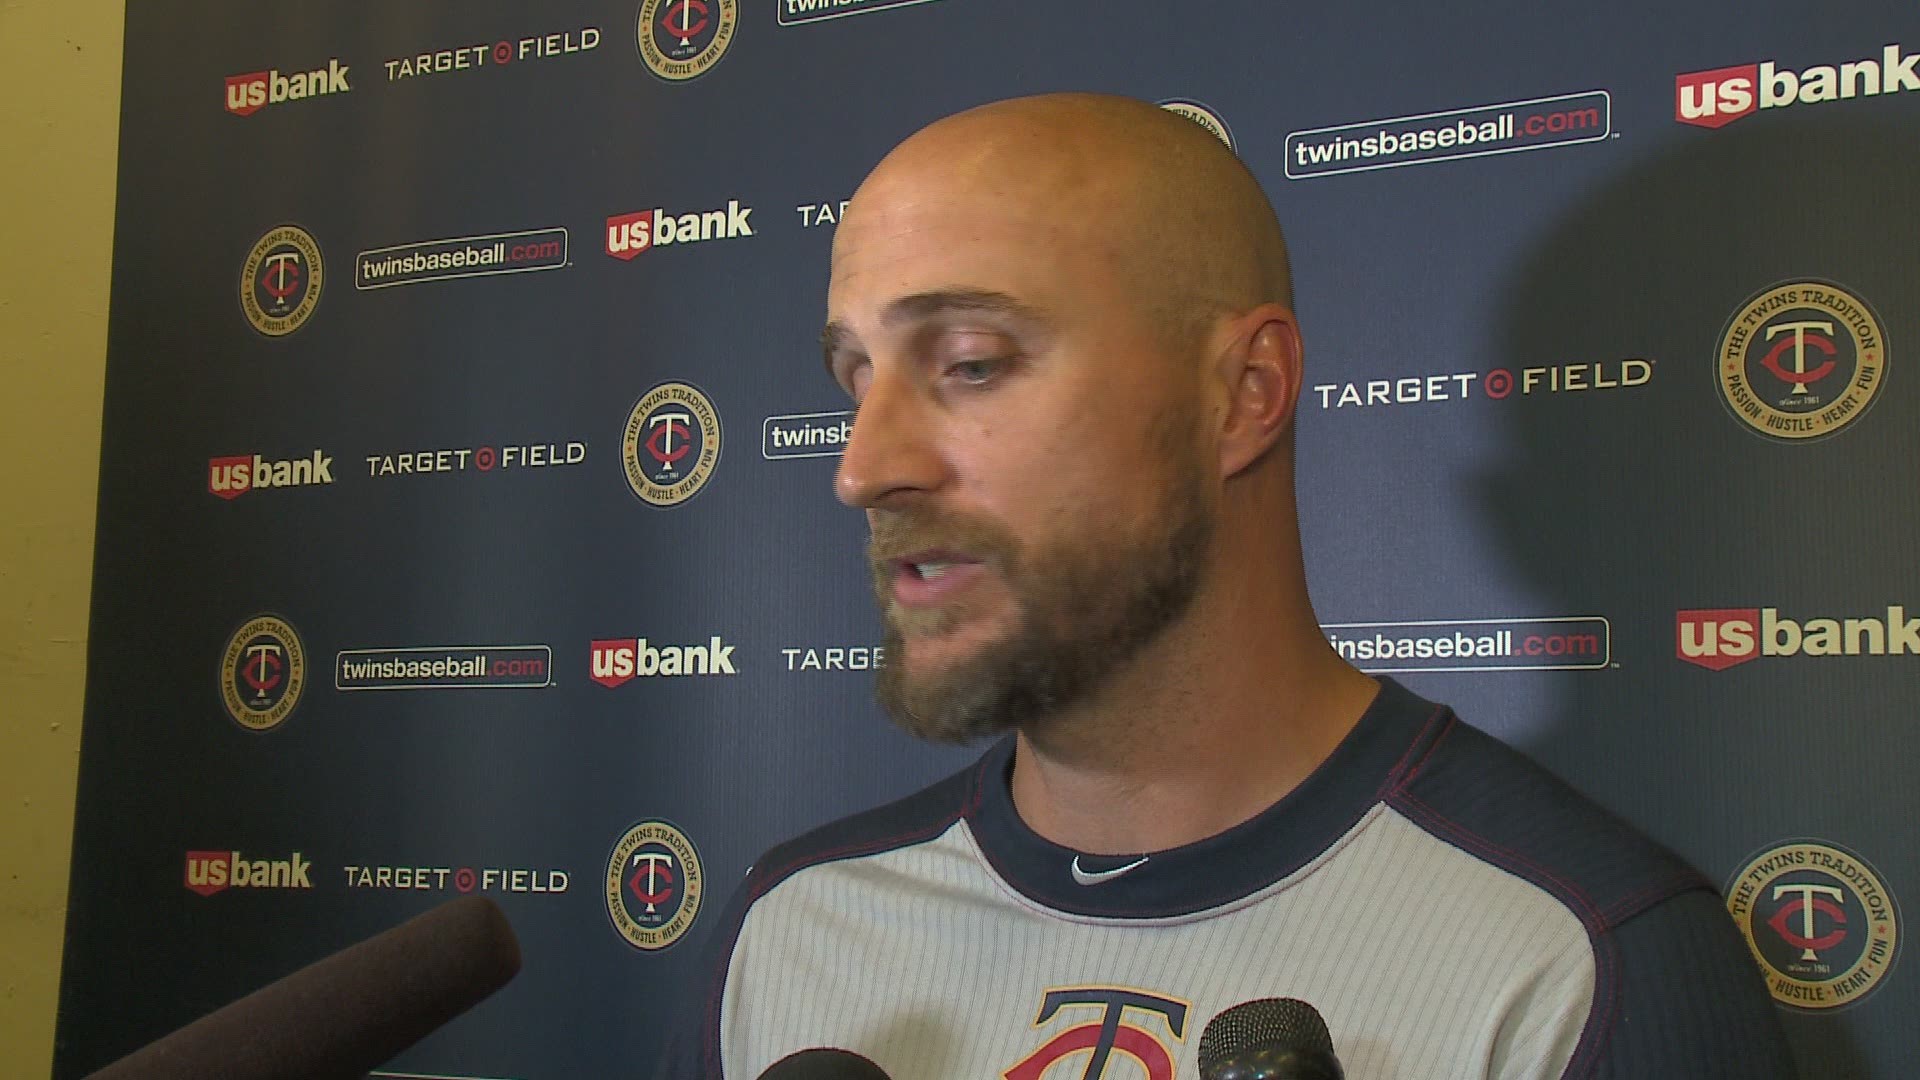 Hear from Rocco and Nelson Cruz on what it means to play in front of a packed Target Field